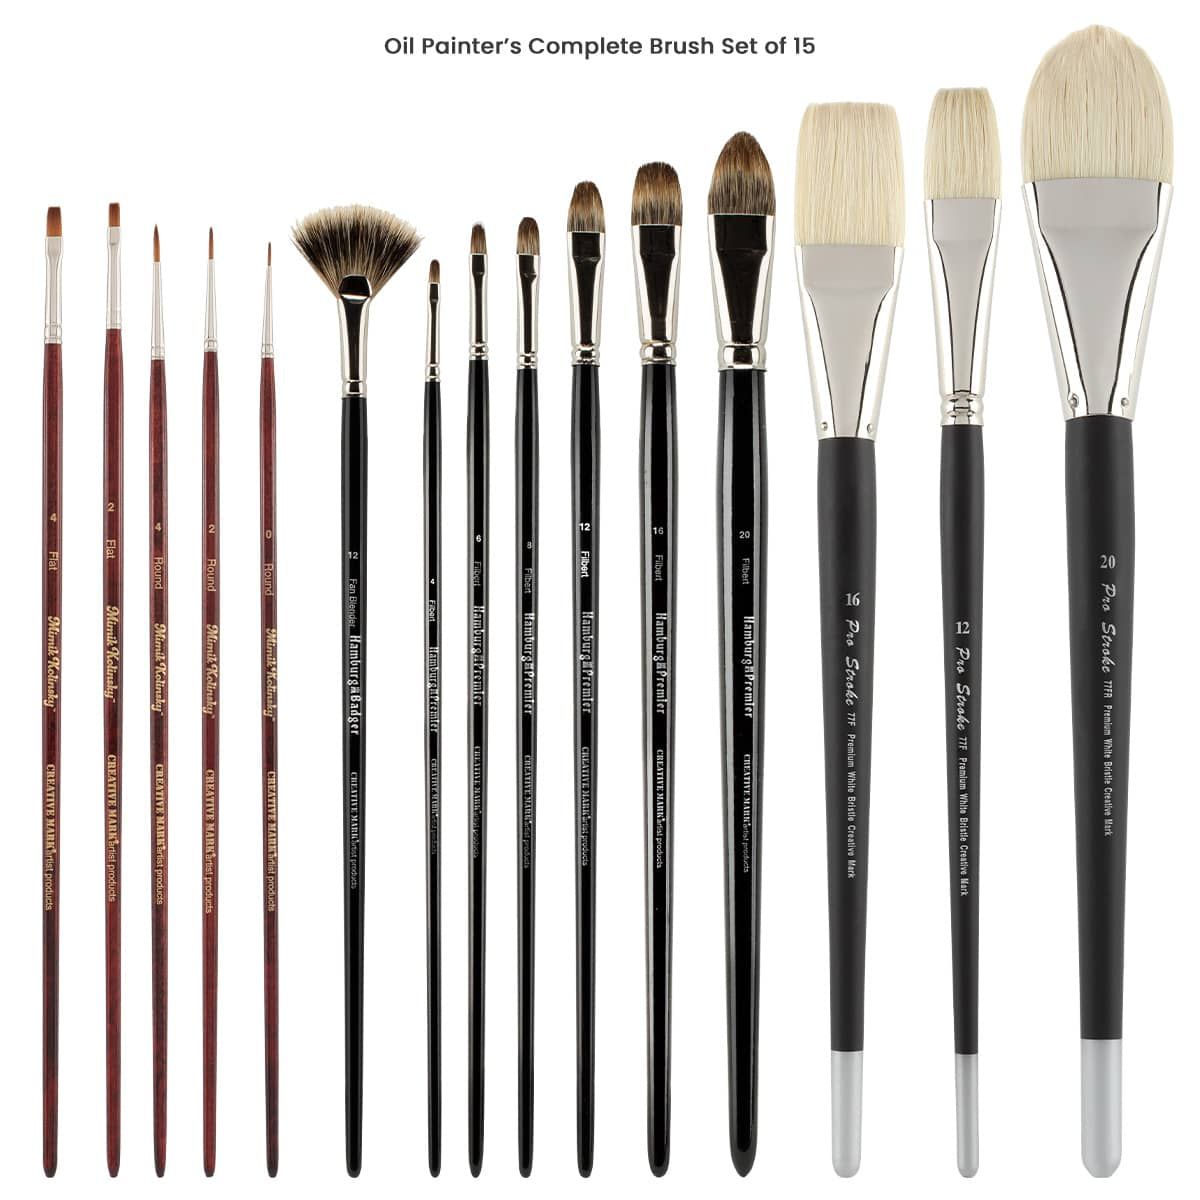 Some of the most essential brushes for oil painting